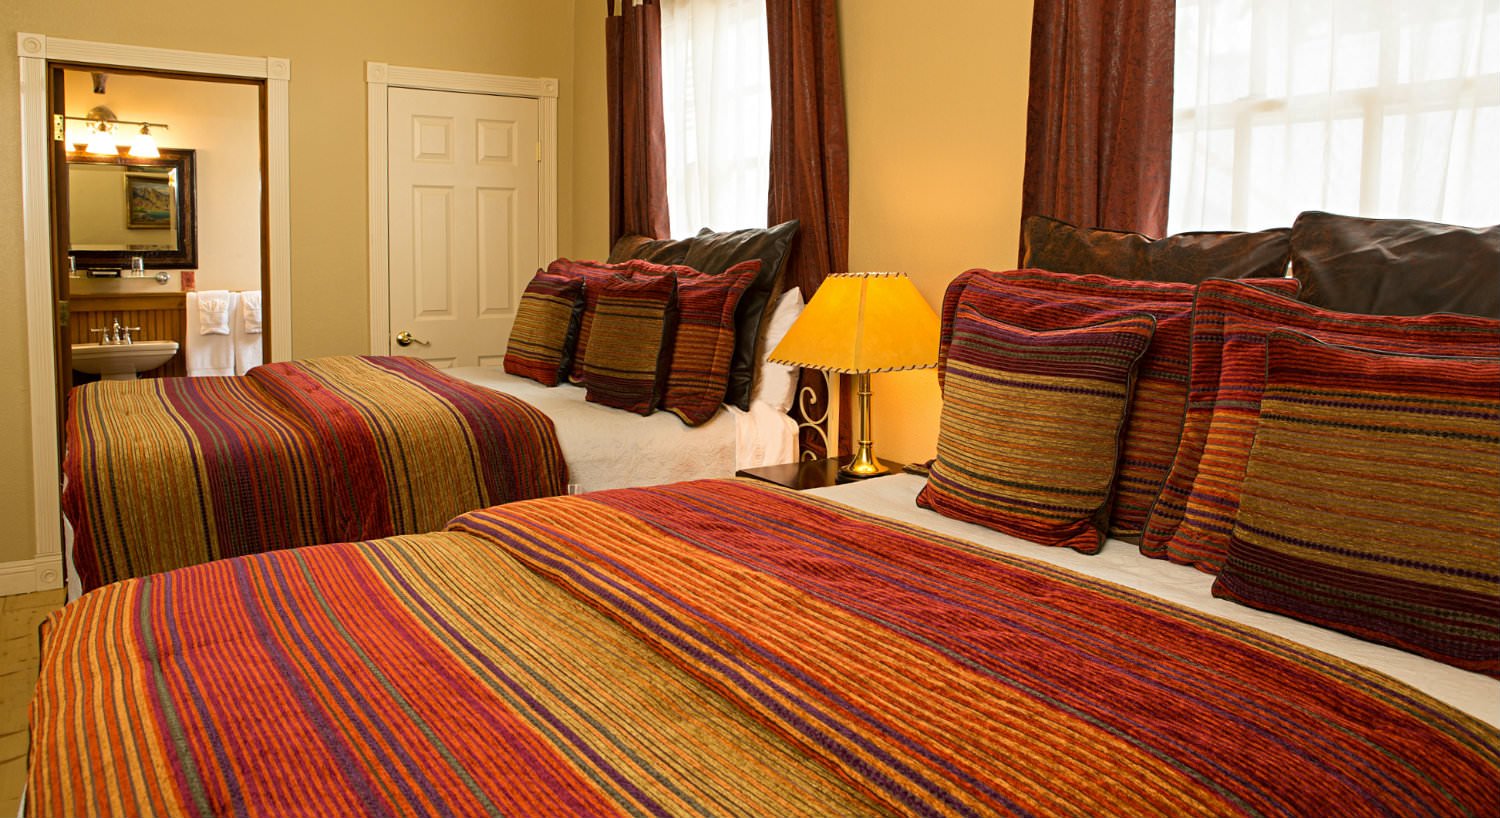 Bedroom with two beds covered in red and gold striped bedspreads, a nightstand, and two large windows